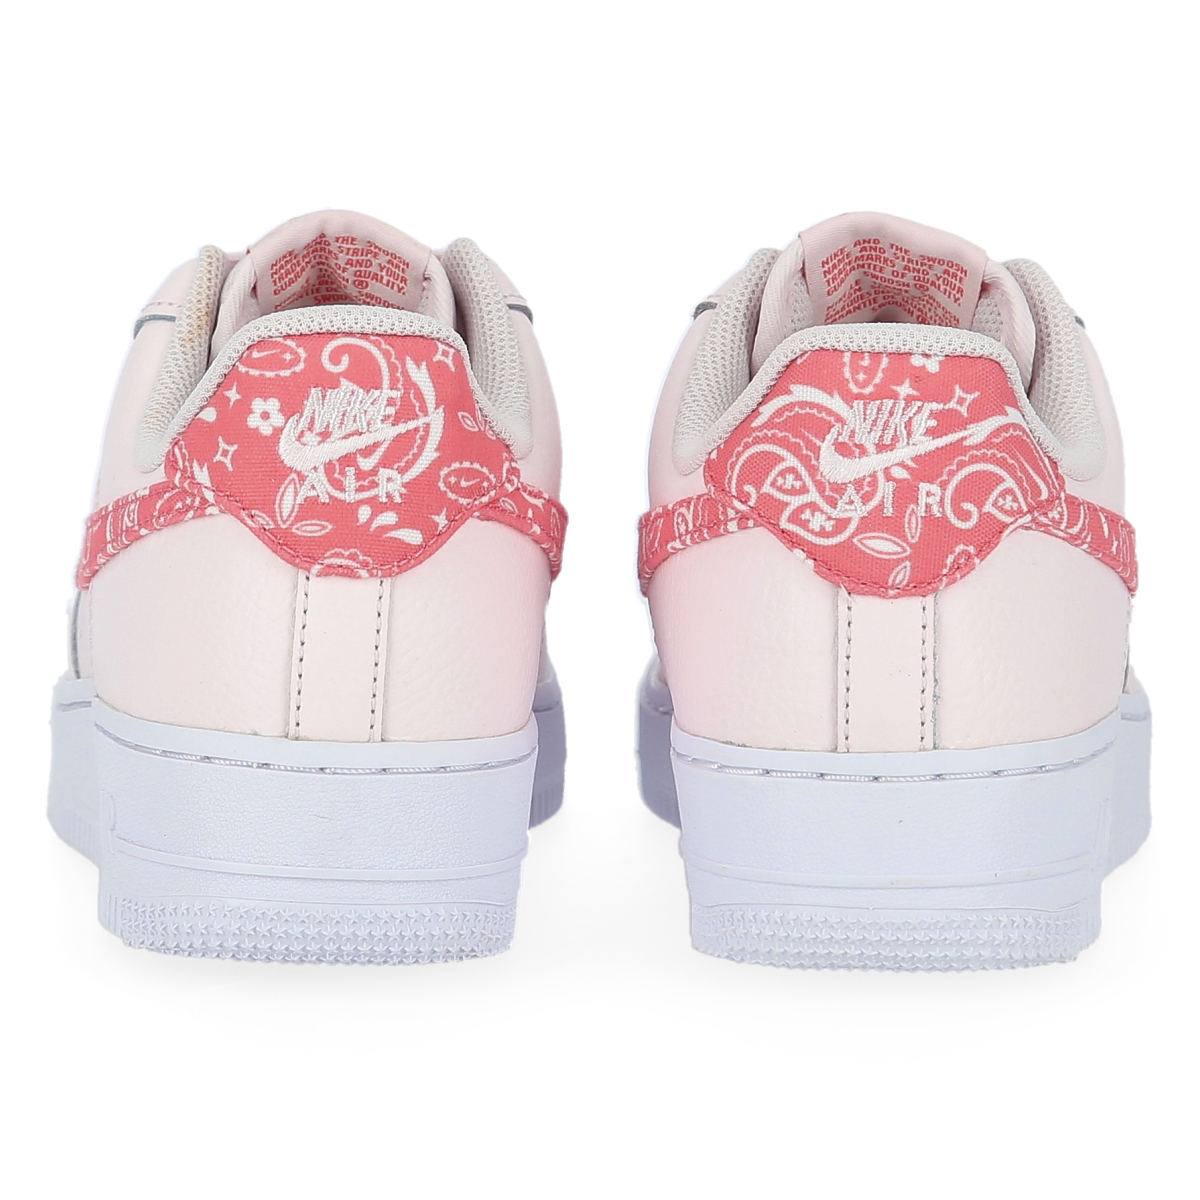 Zapatillas Nike Air Force 1 07 Eppk Mujer,  image number null